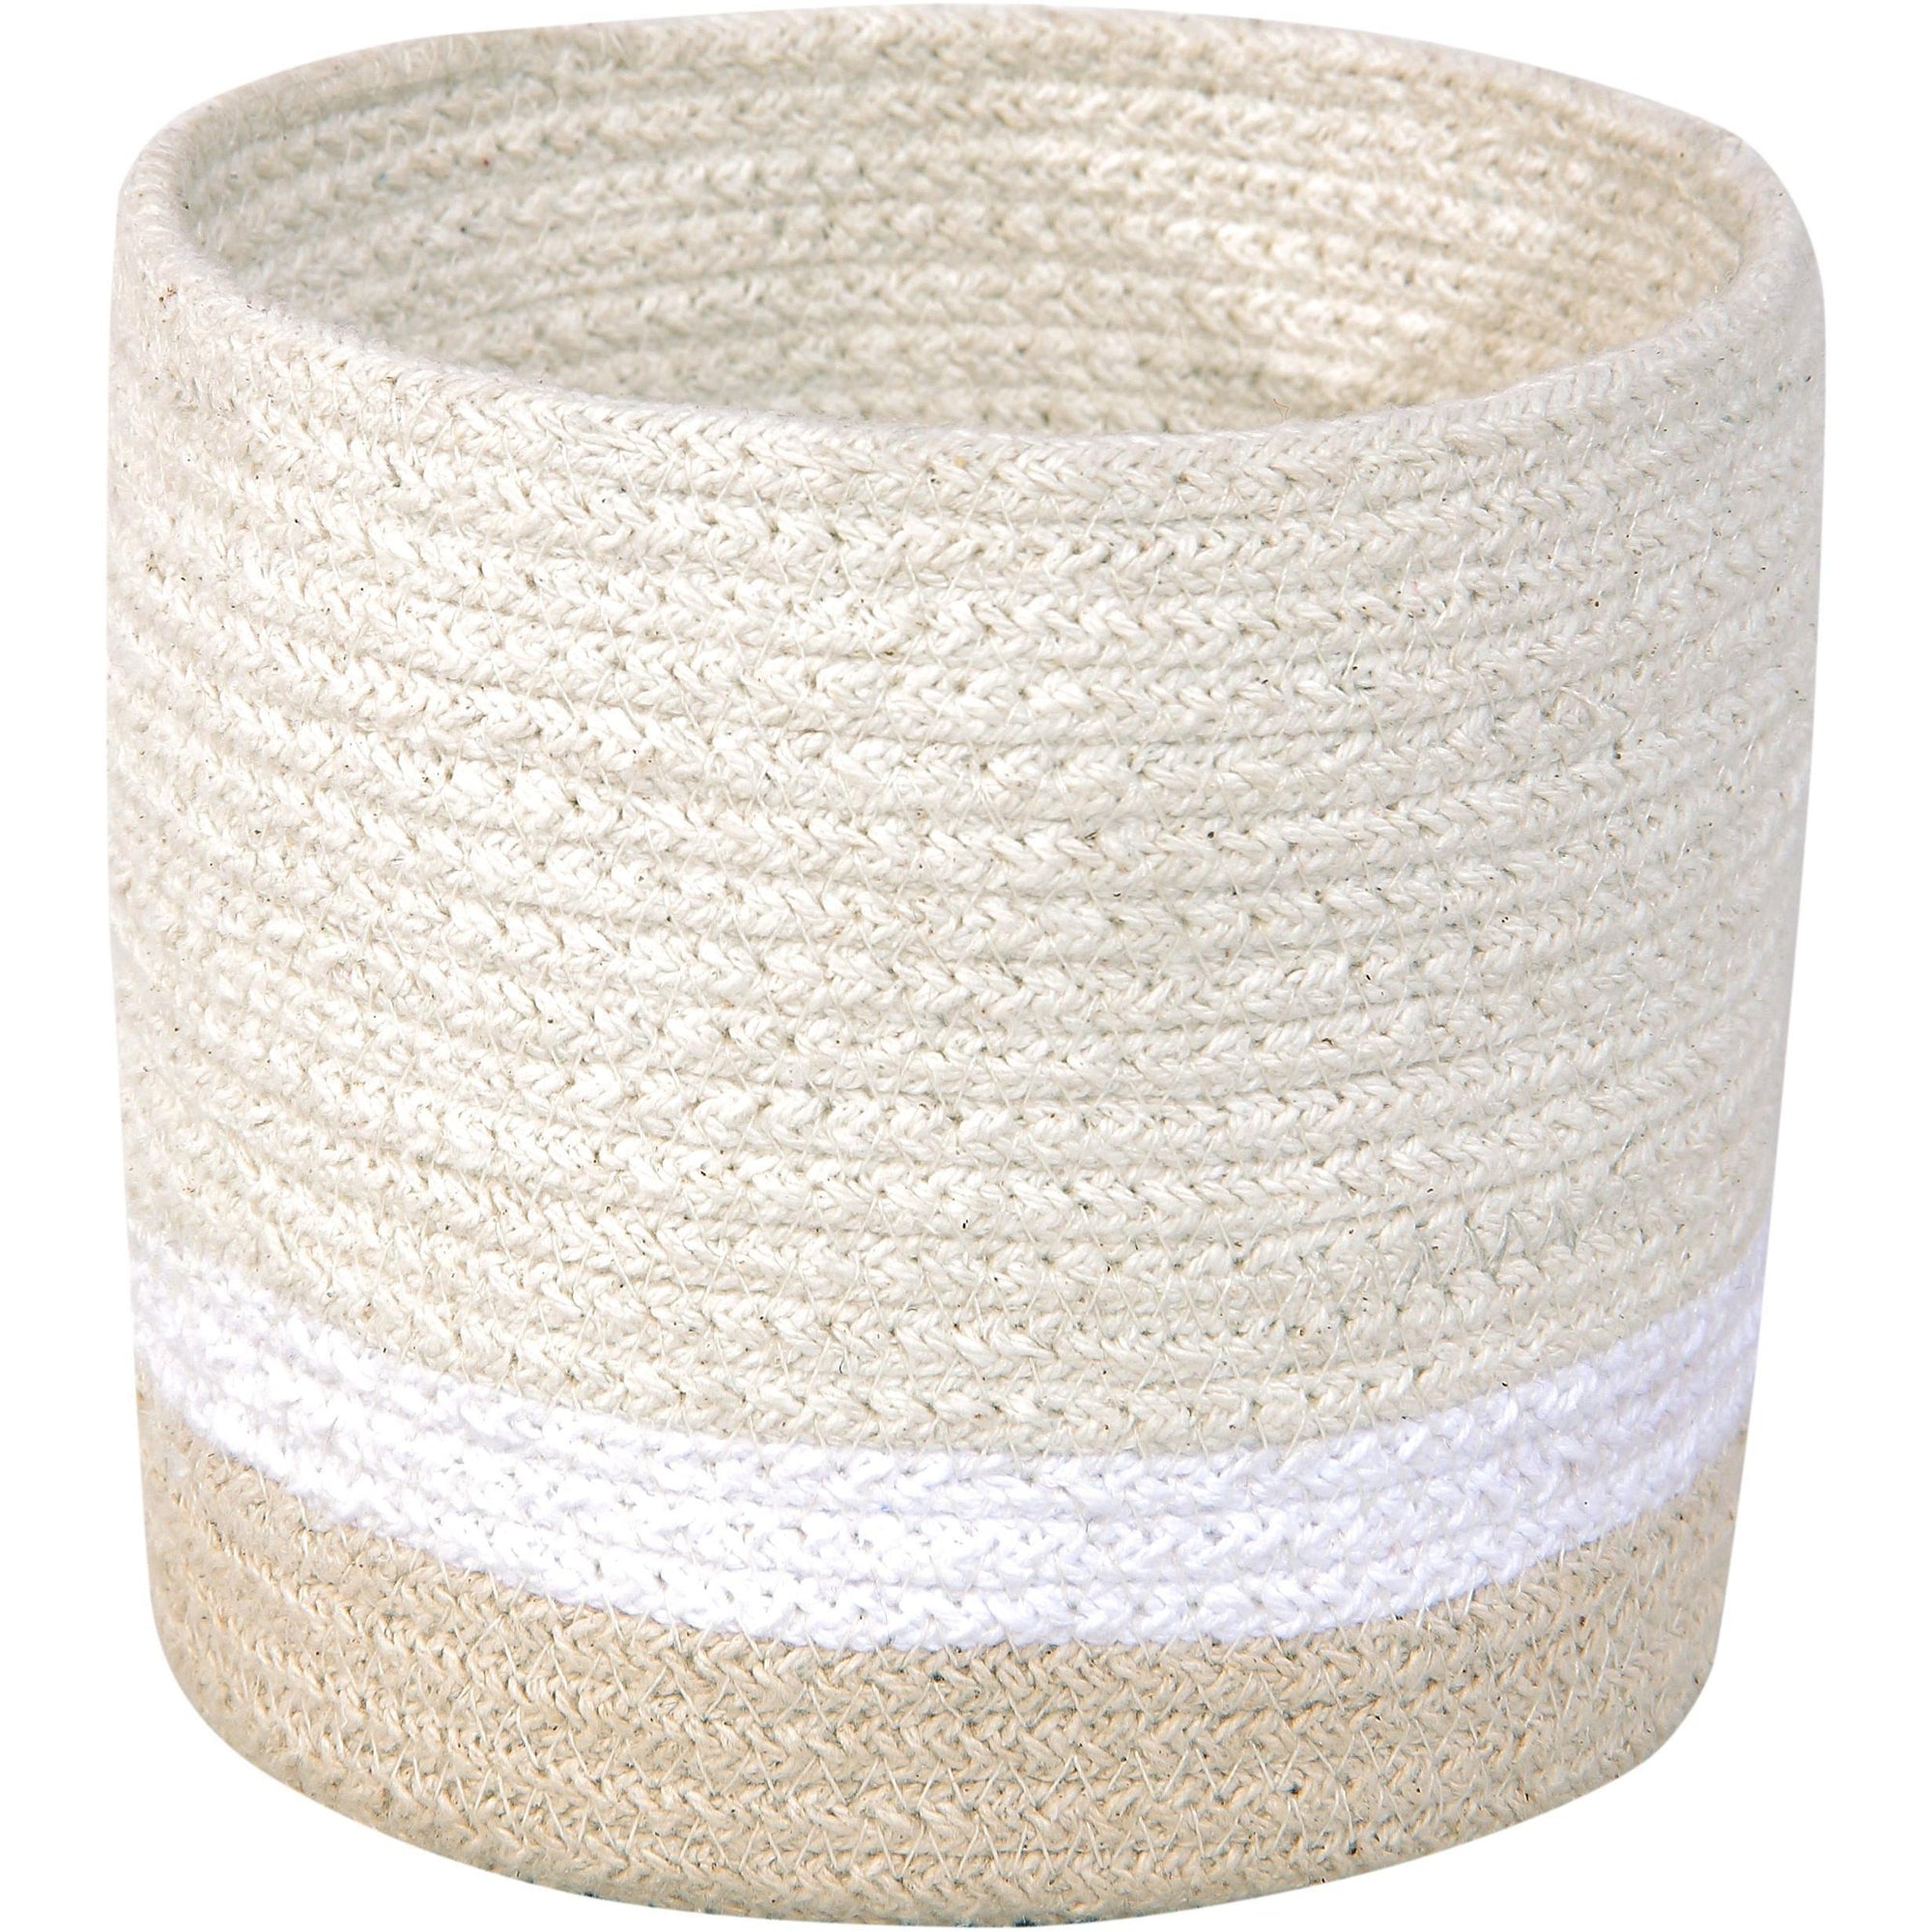 Rugs by Roo | Lorena Canals Mini Tricolor Ivory Basket-BSK-TRIC-IVO